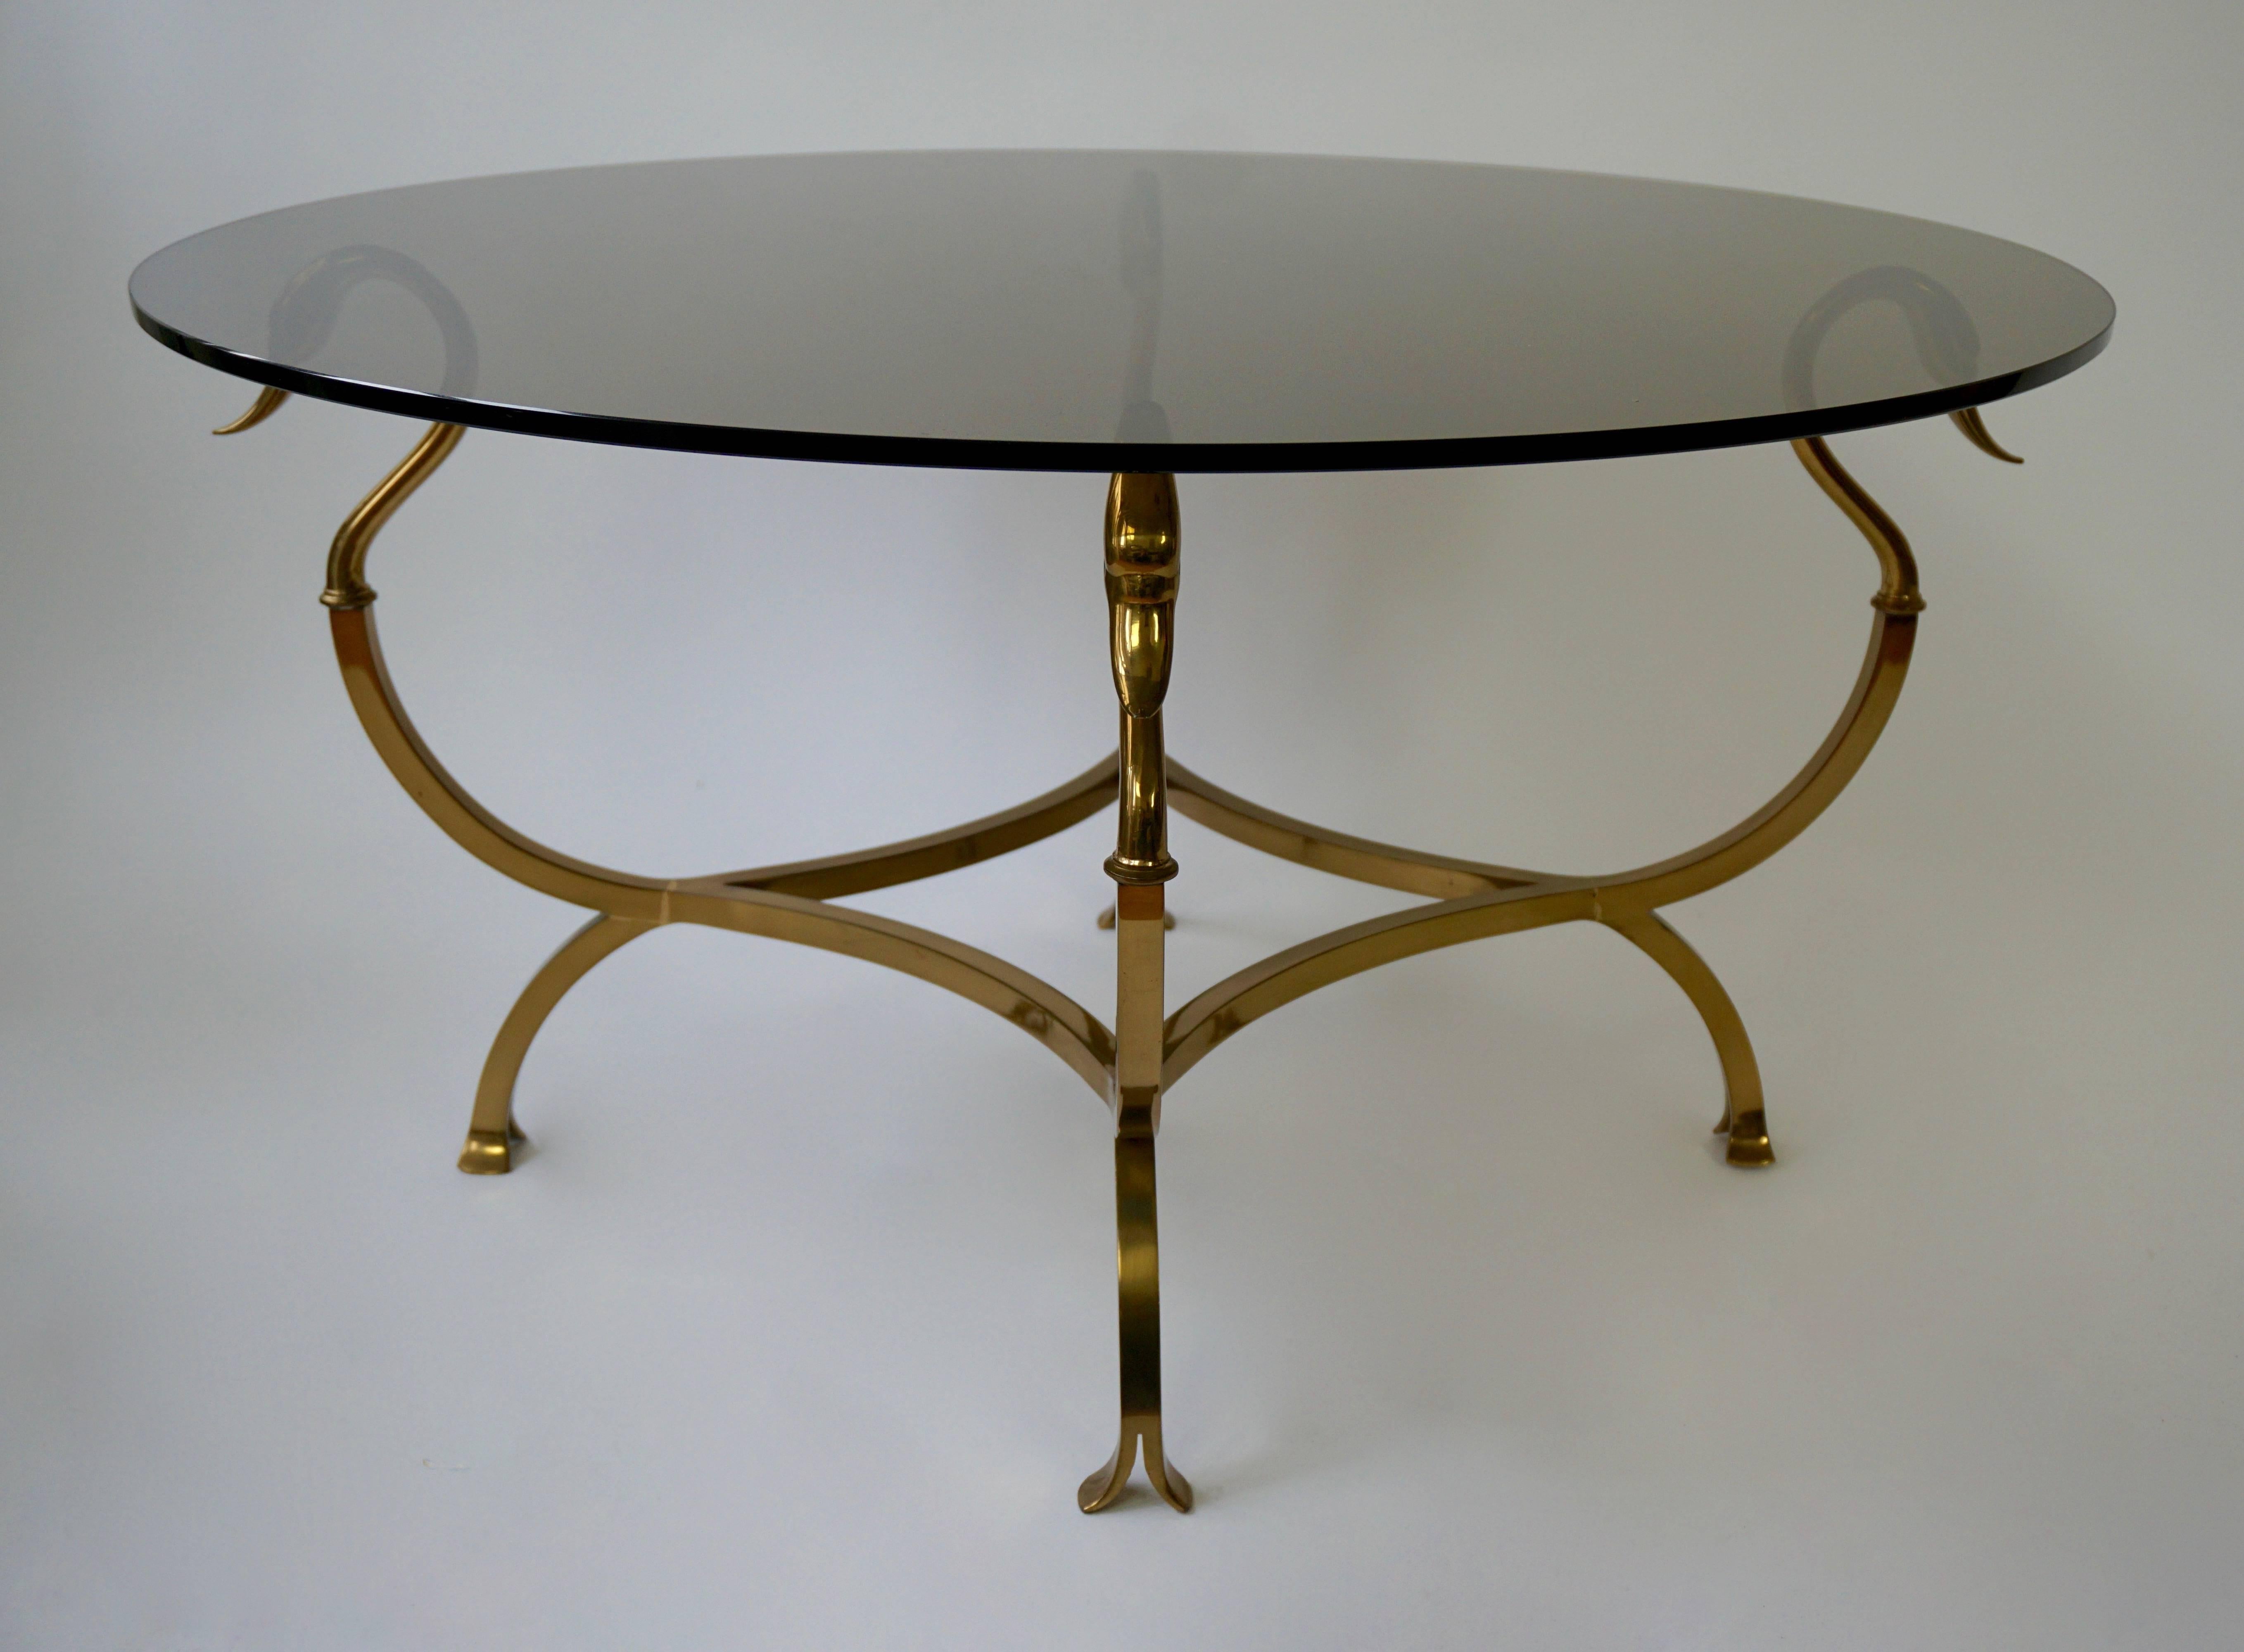 Stylized brass coffee or cocktail table in the style of Maison Jansen with swan heads and webbed feet.
Diameter 90 cm.
Height 48 cm.